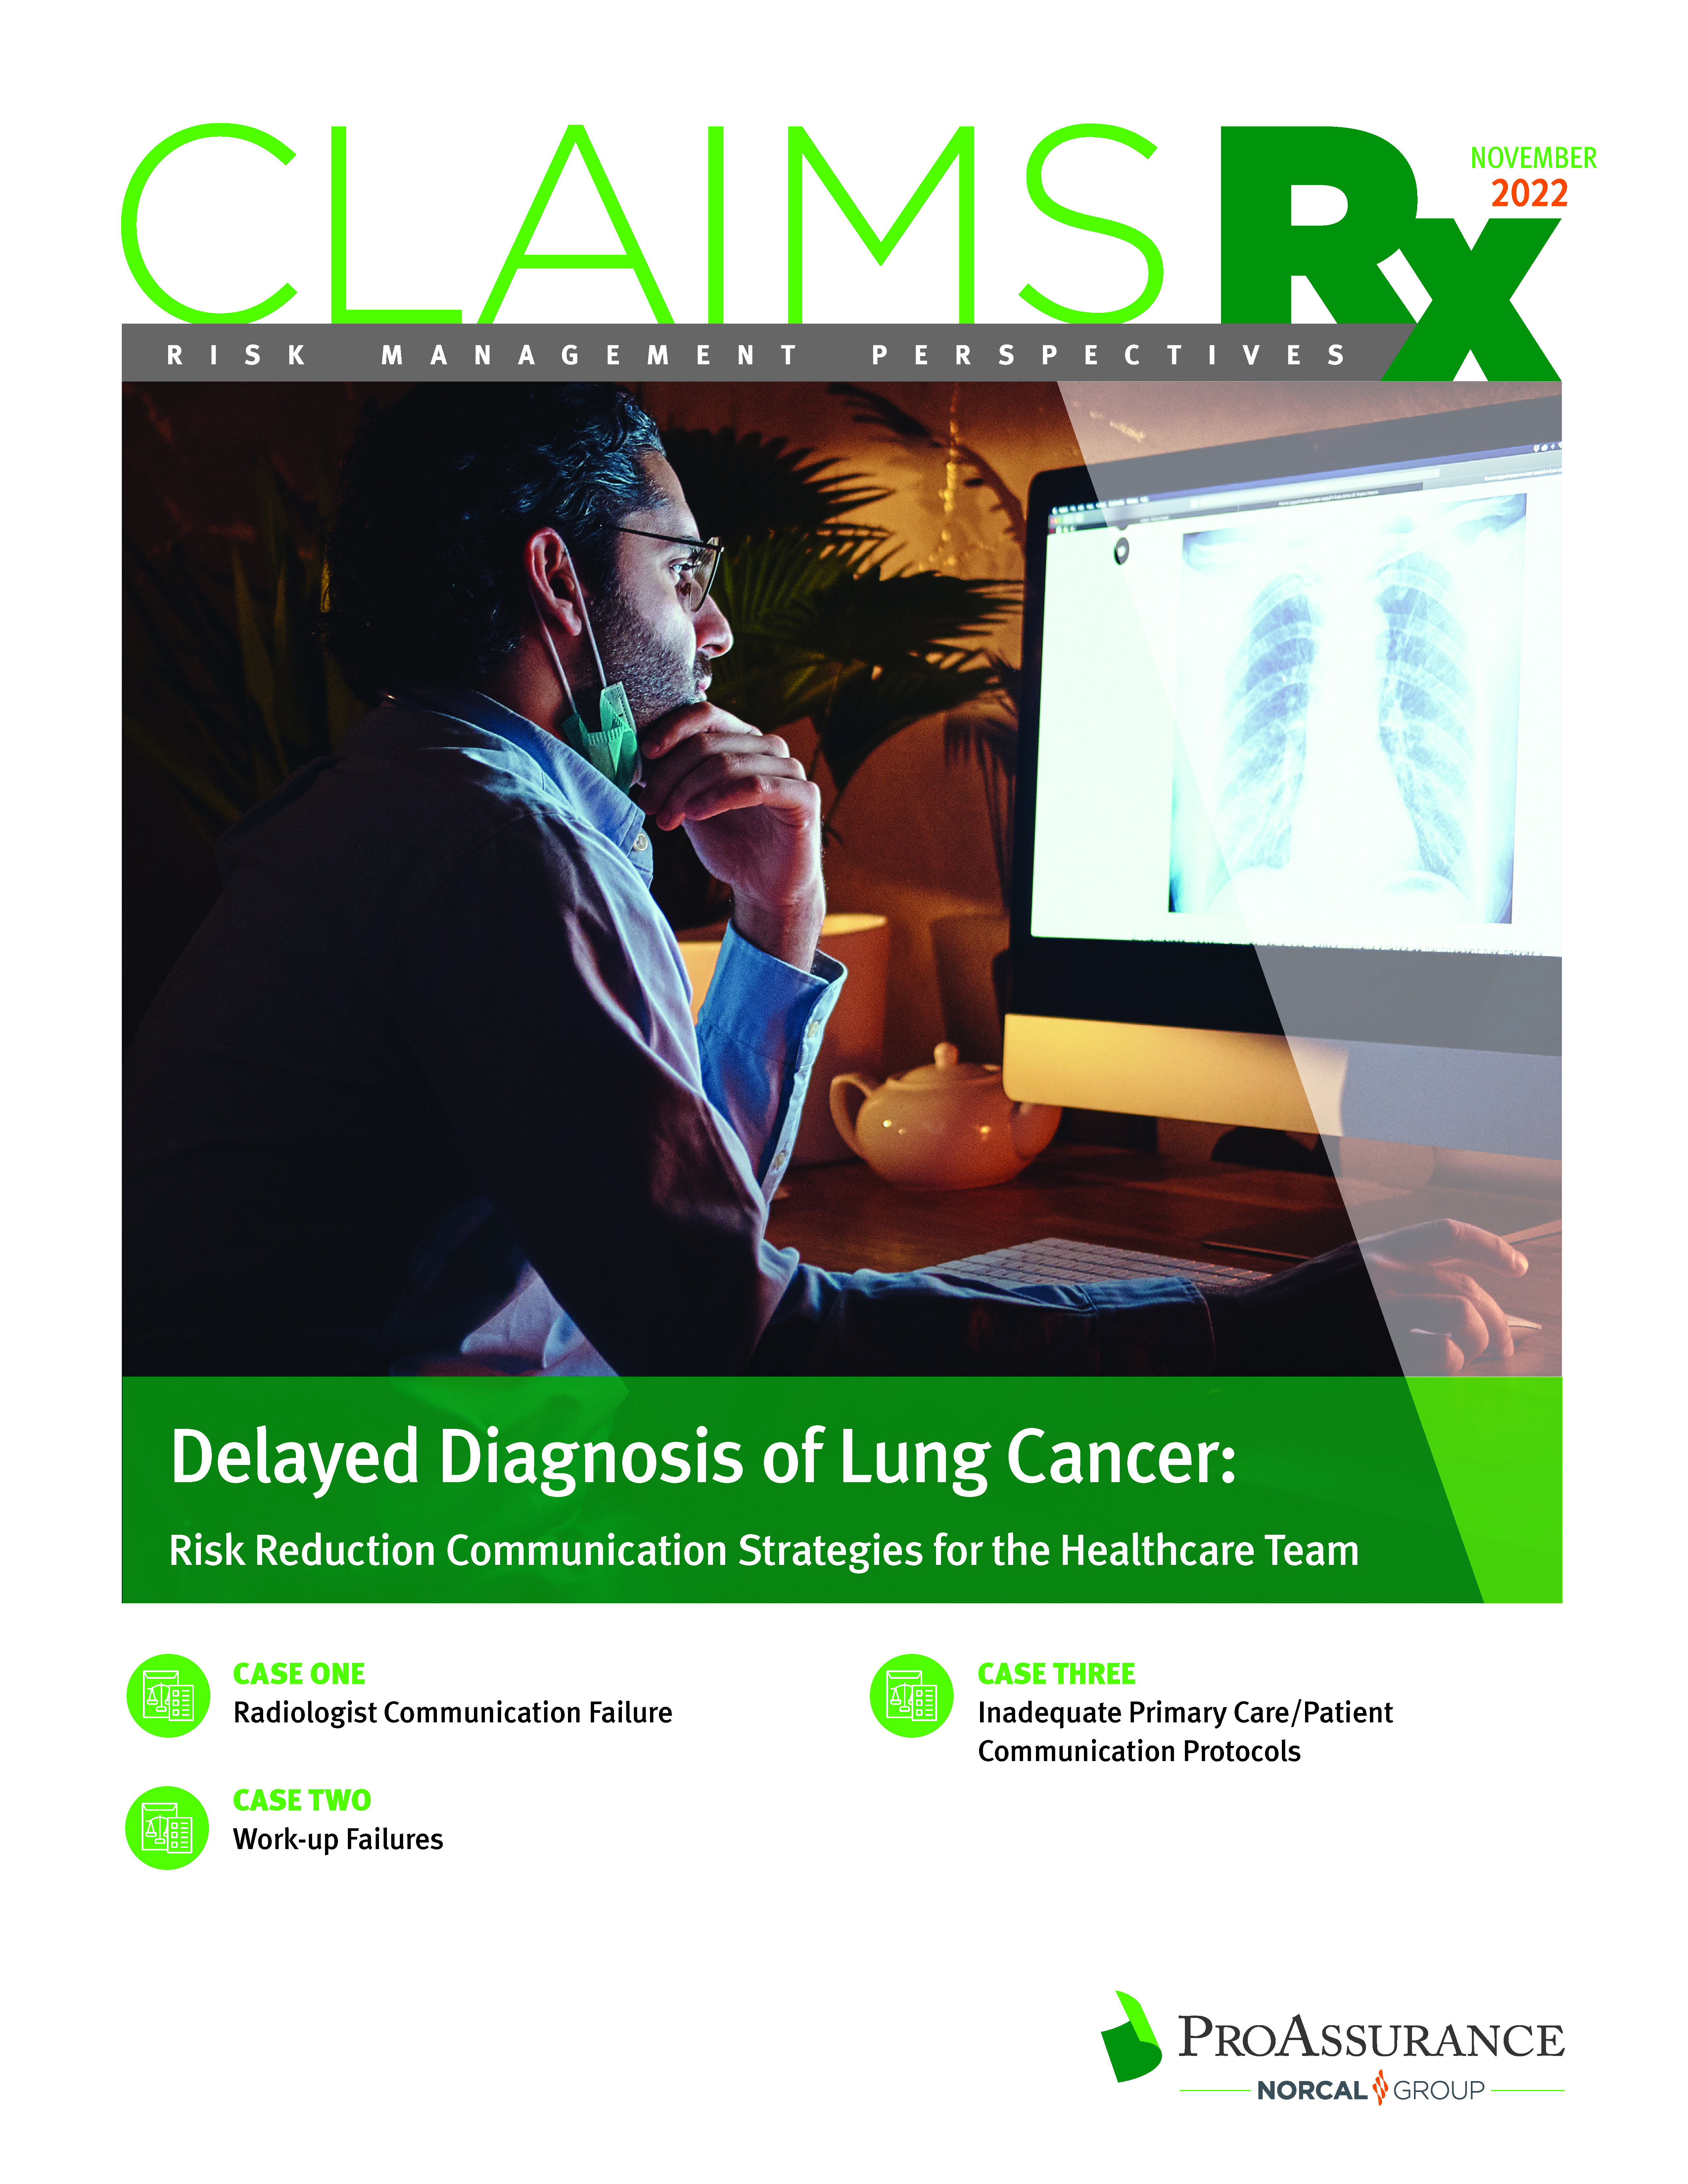 Delayed Diagnosis of Lung Cancer